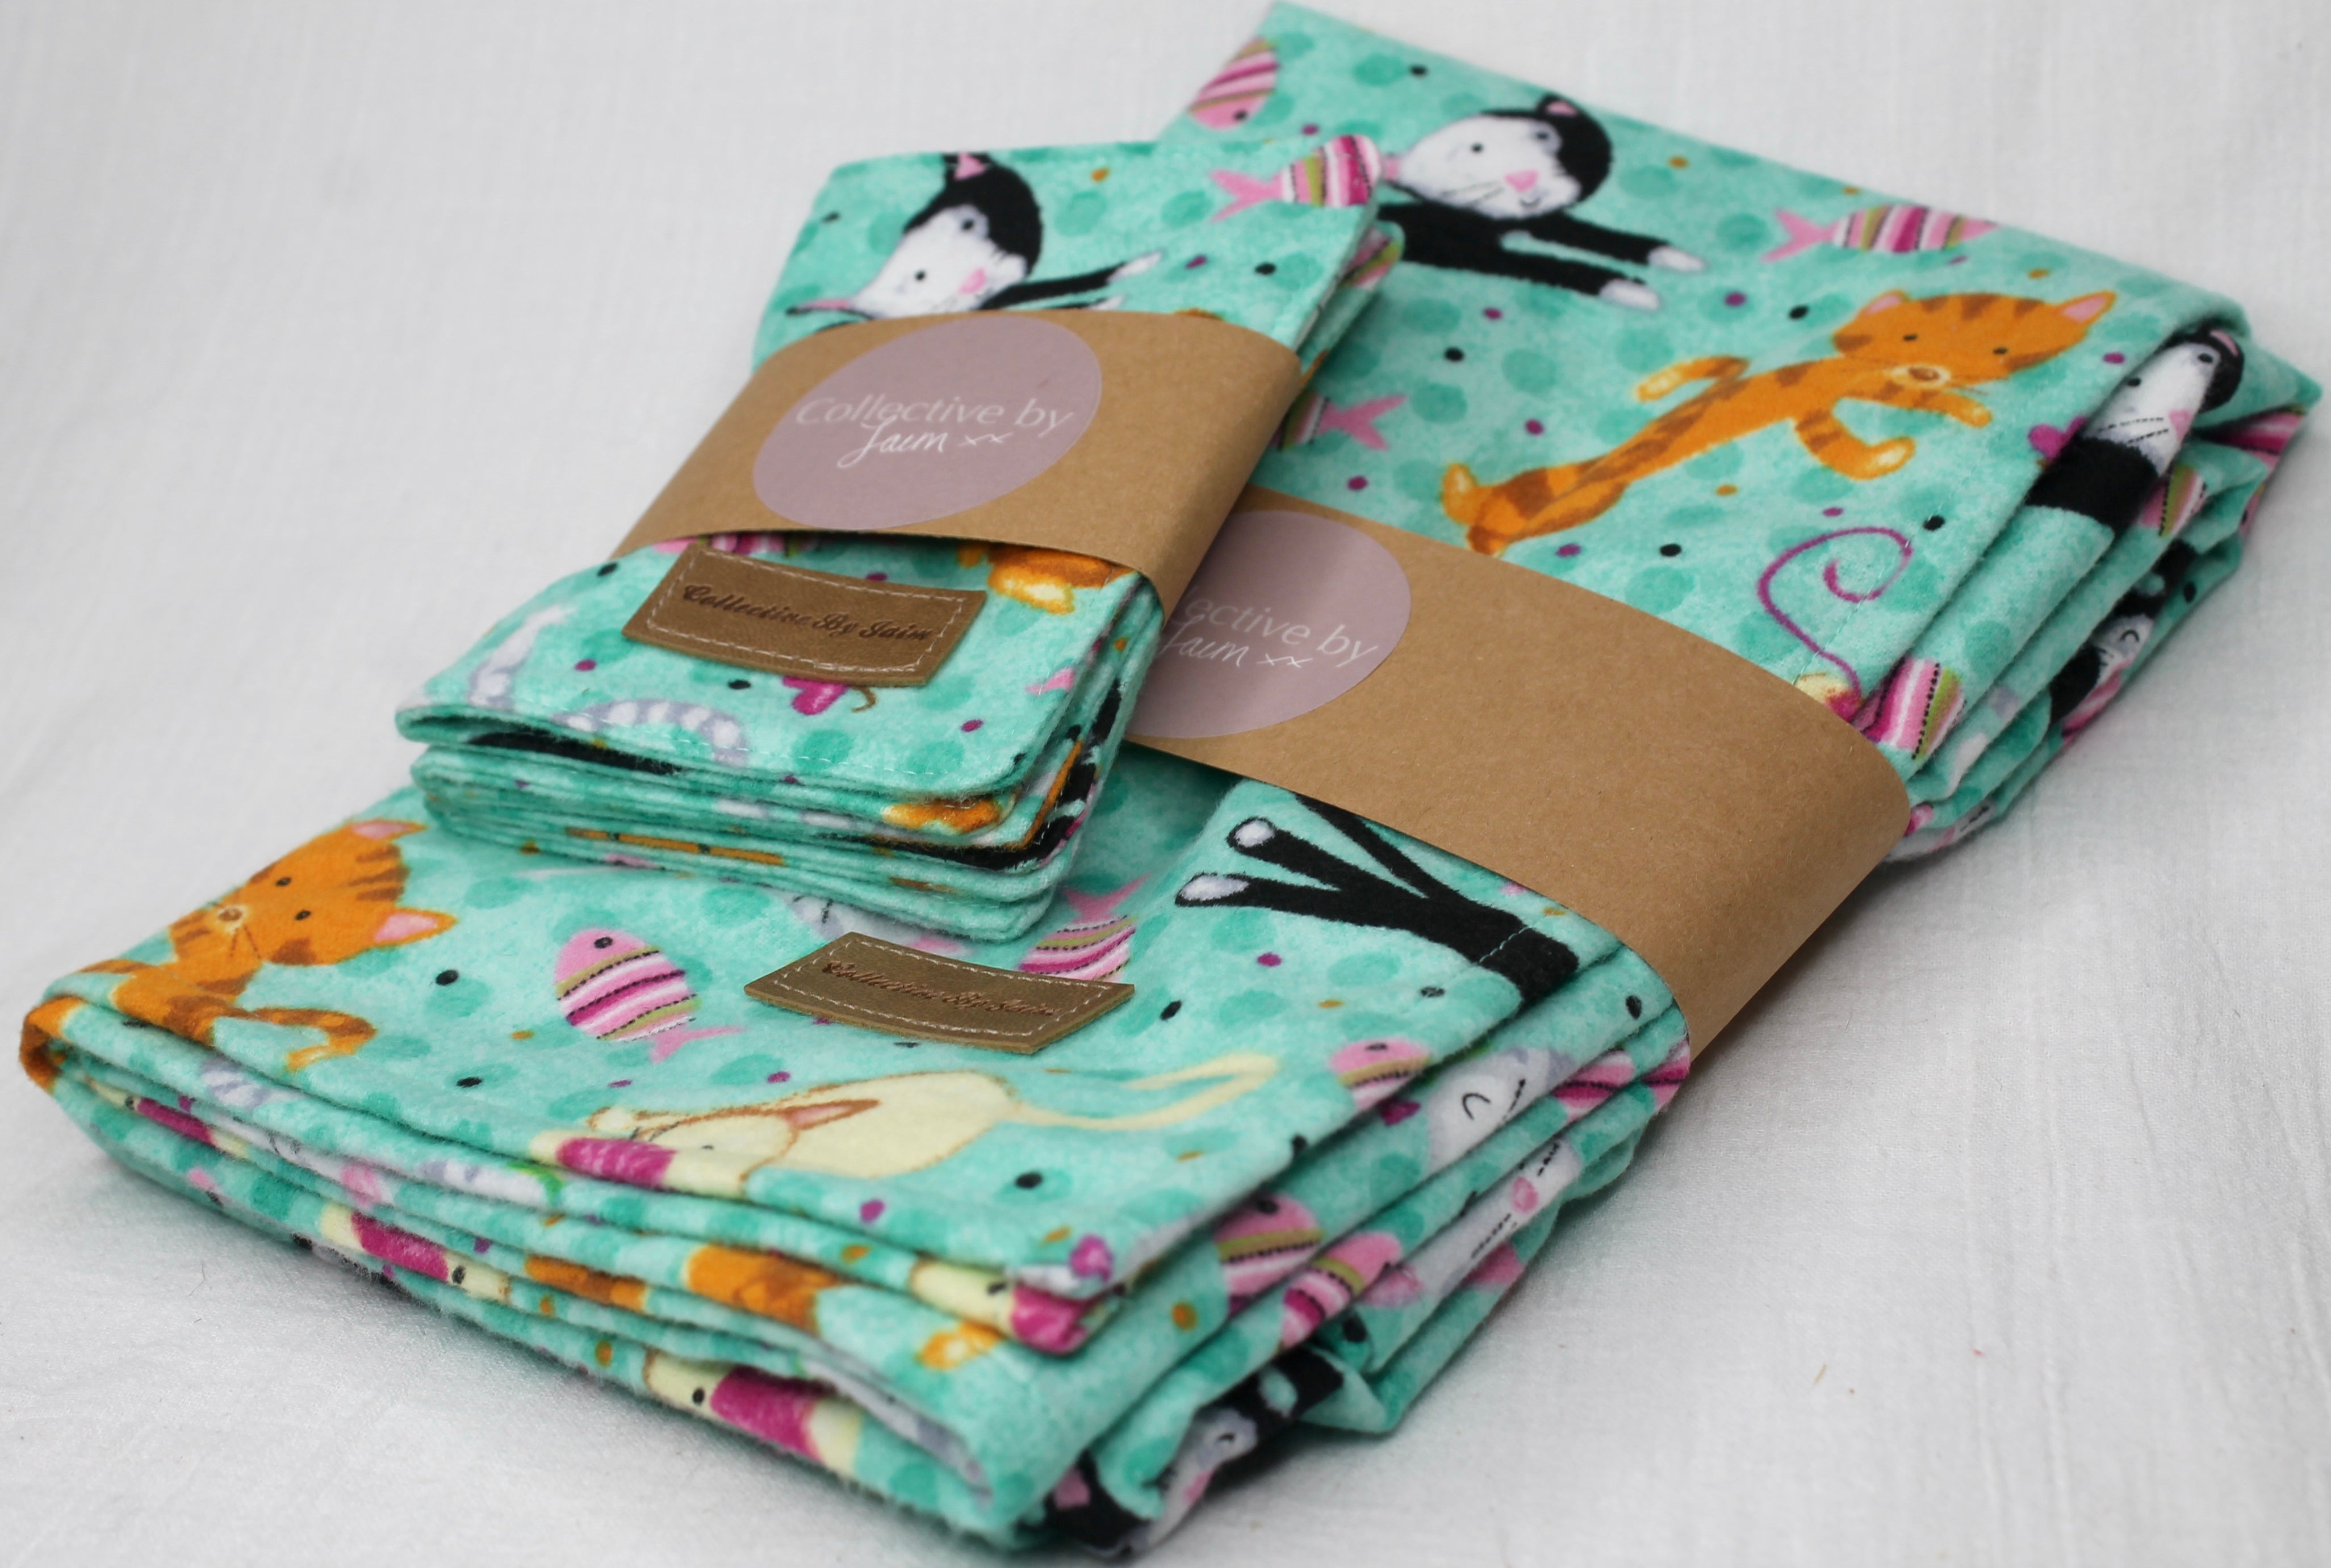 Cats At Play Nursery Blanket & Wipes Set